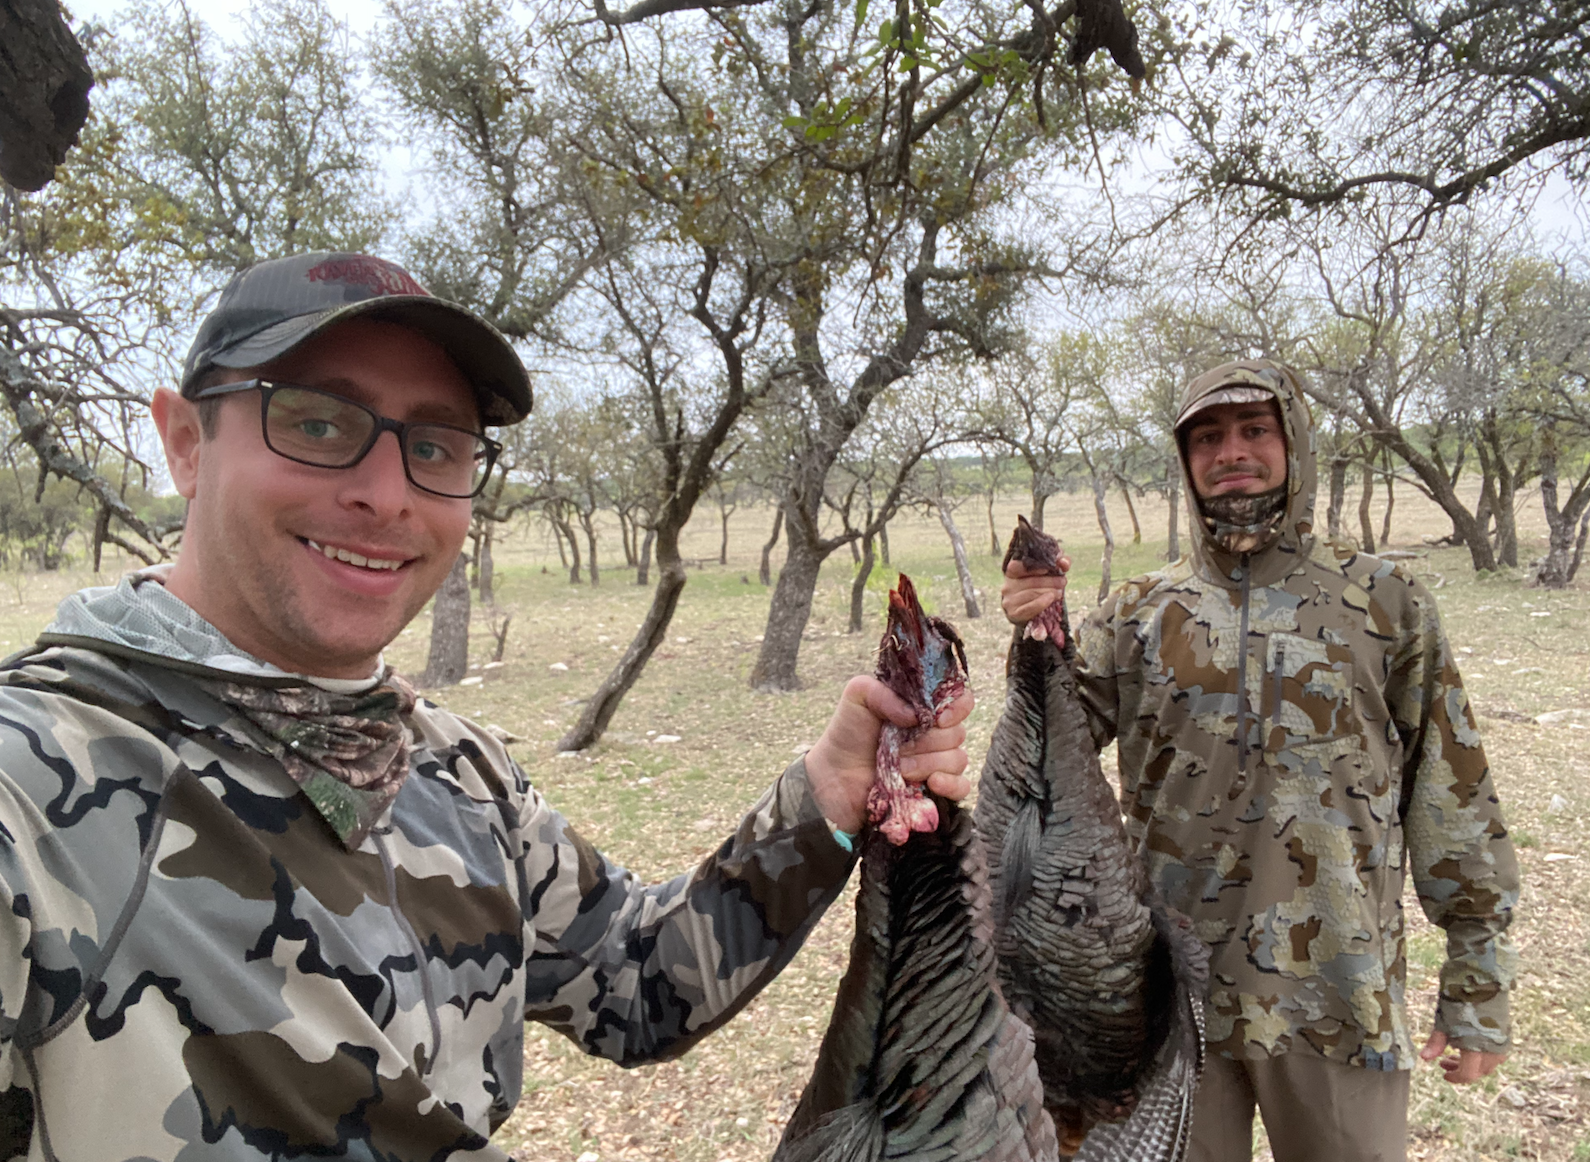 Brent and I with our turkeys